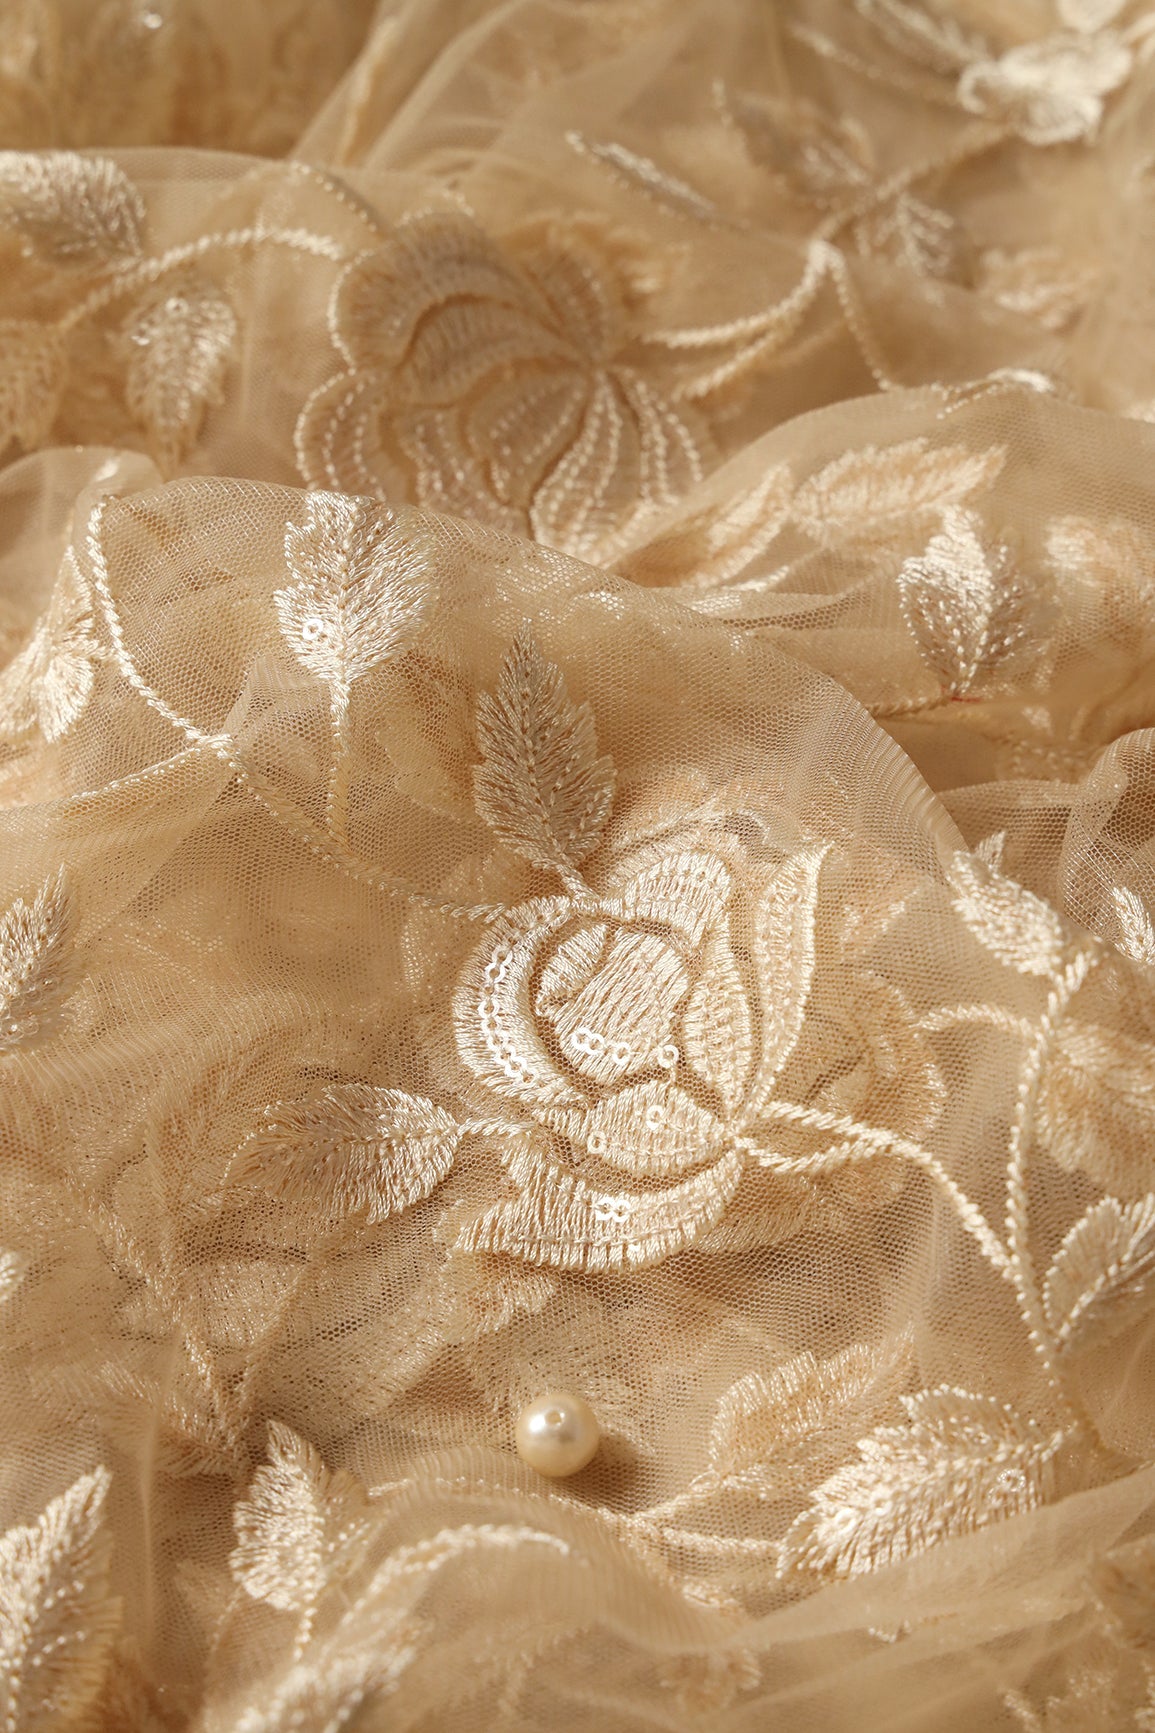 Gorgeous Beige Thread With Sequins Floral Leafy Embroidery On Beige Soft Net Fabric - doeraa